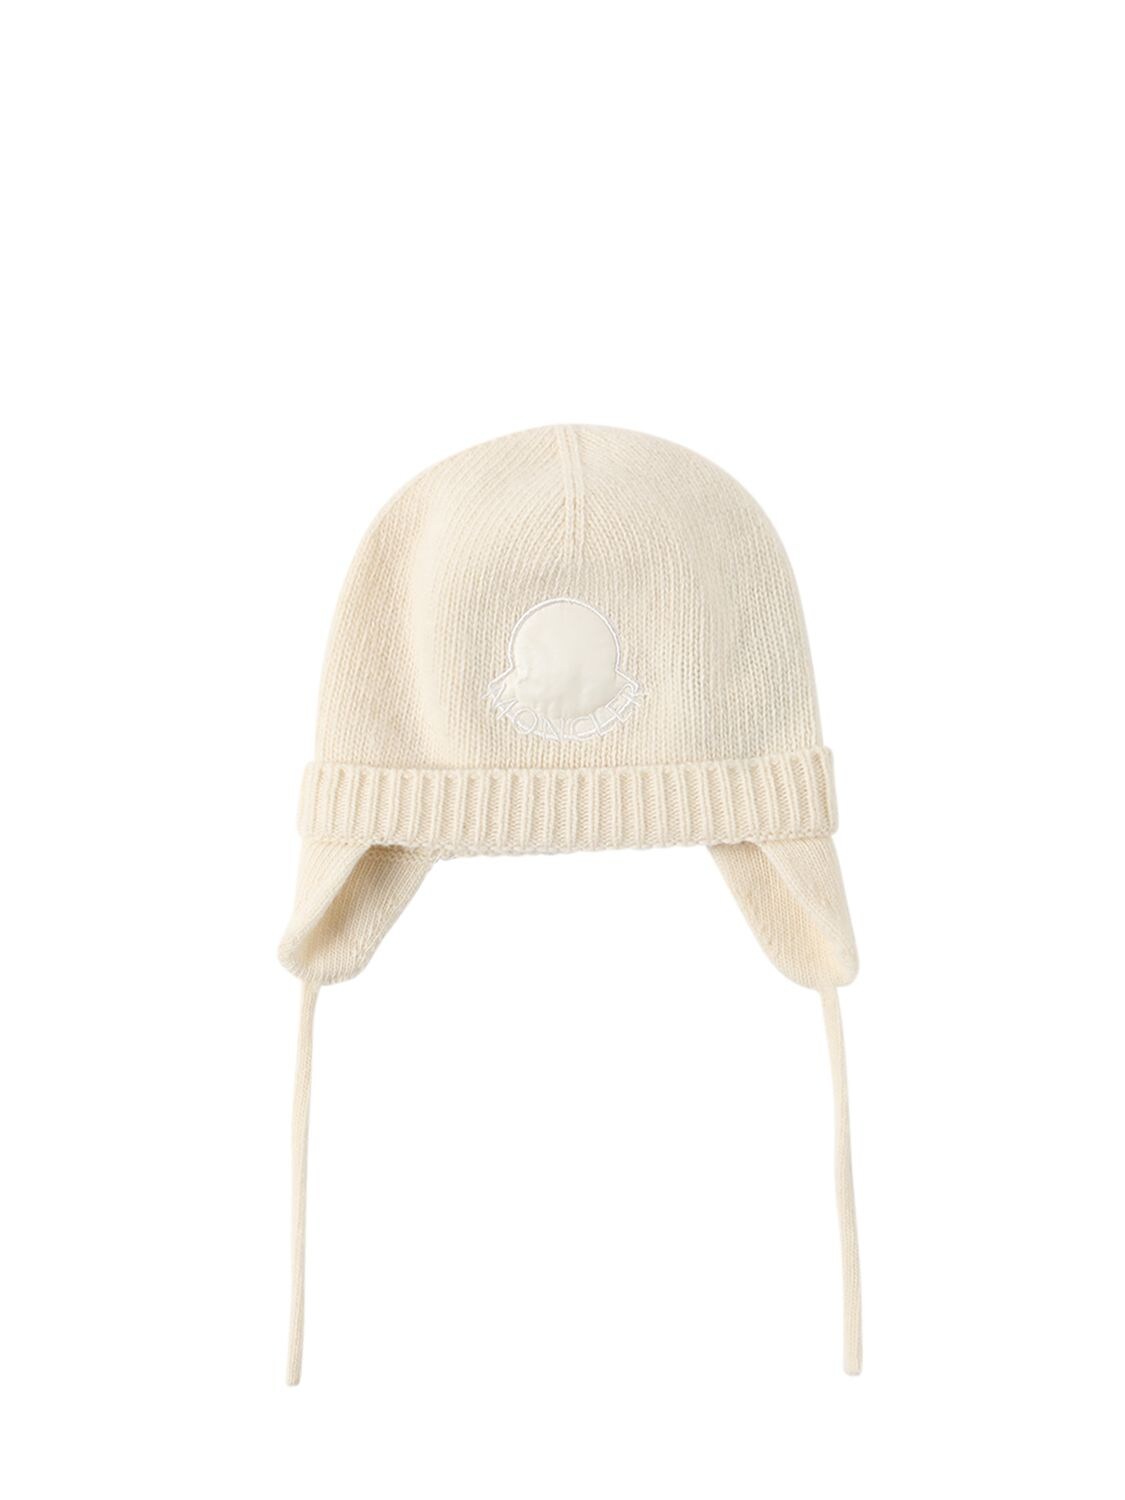 Image of Carded Wool Beanie